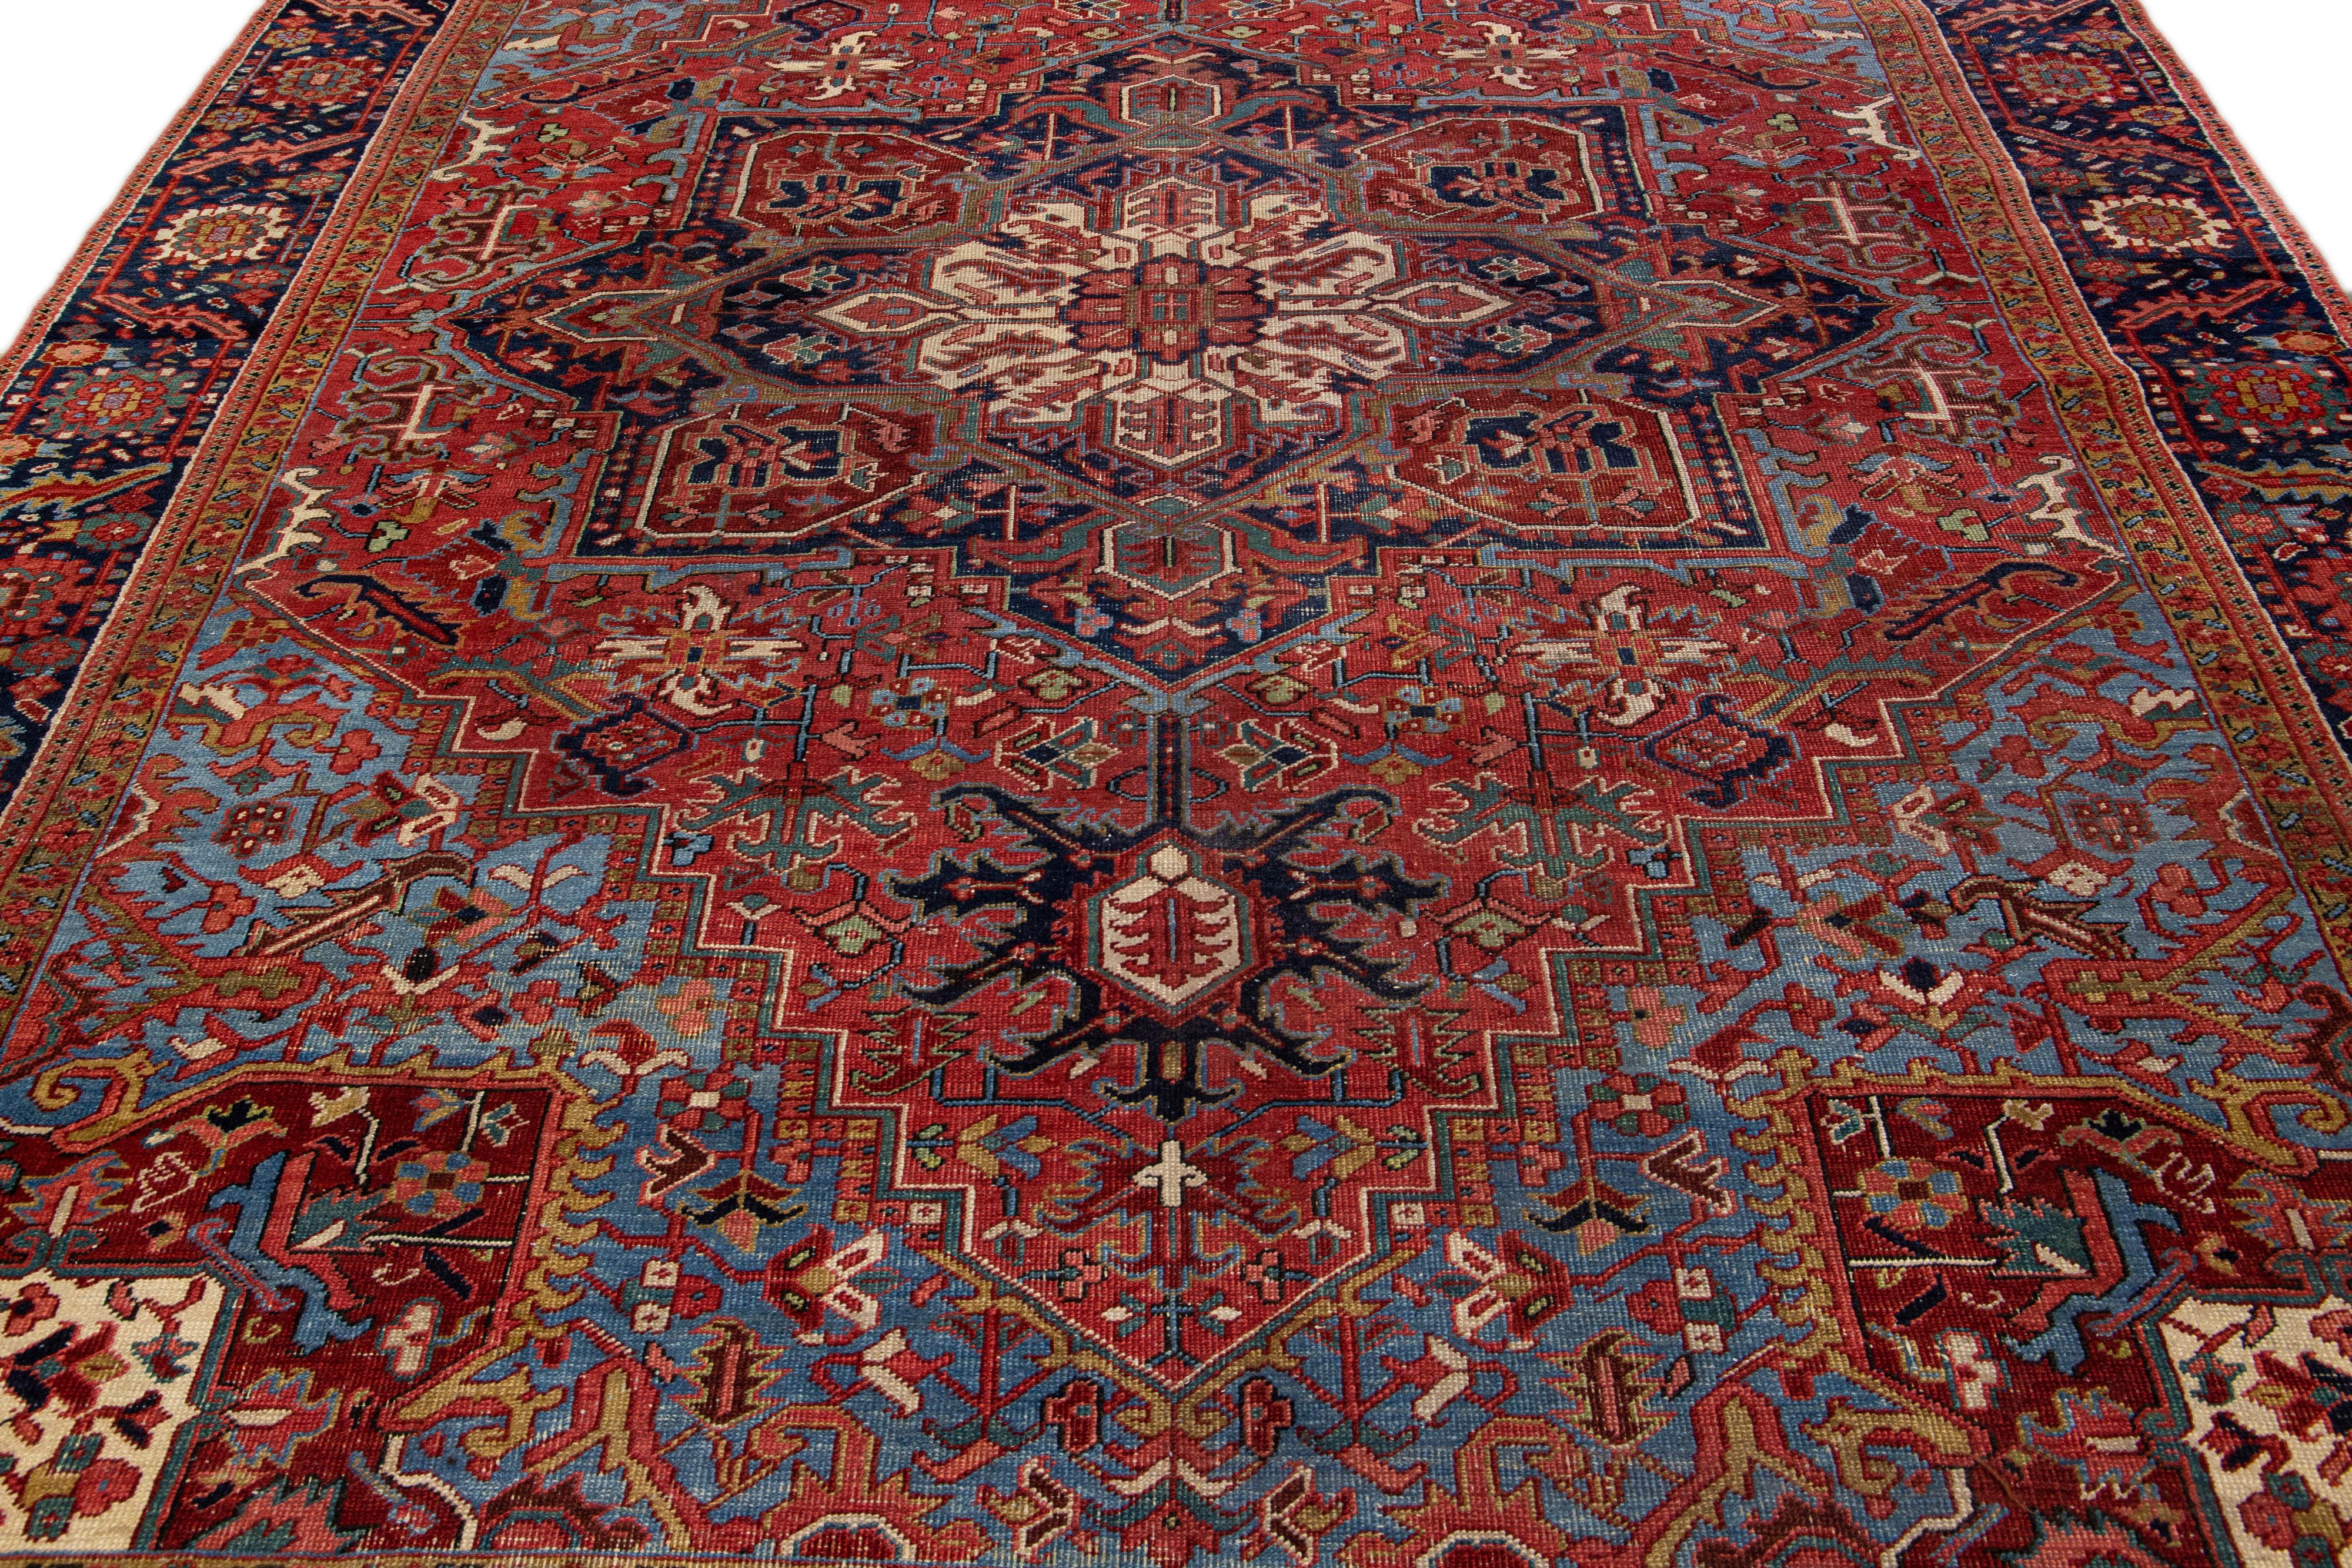 Beautiful antique Heriz hand-knotted wool rug with a red field. This Heriz rug has a navy-blue frame and multi-color accents in a gorgeous all-over Medallion floral design.

This rug measures: 9'5